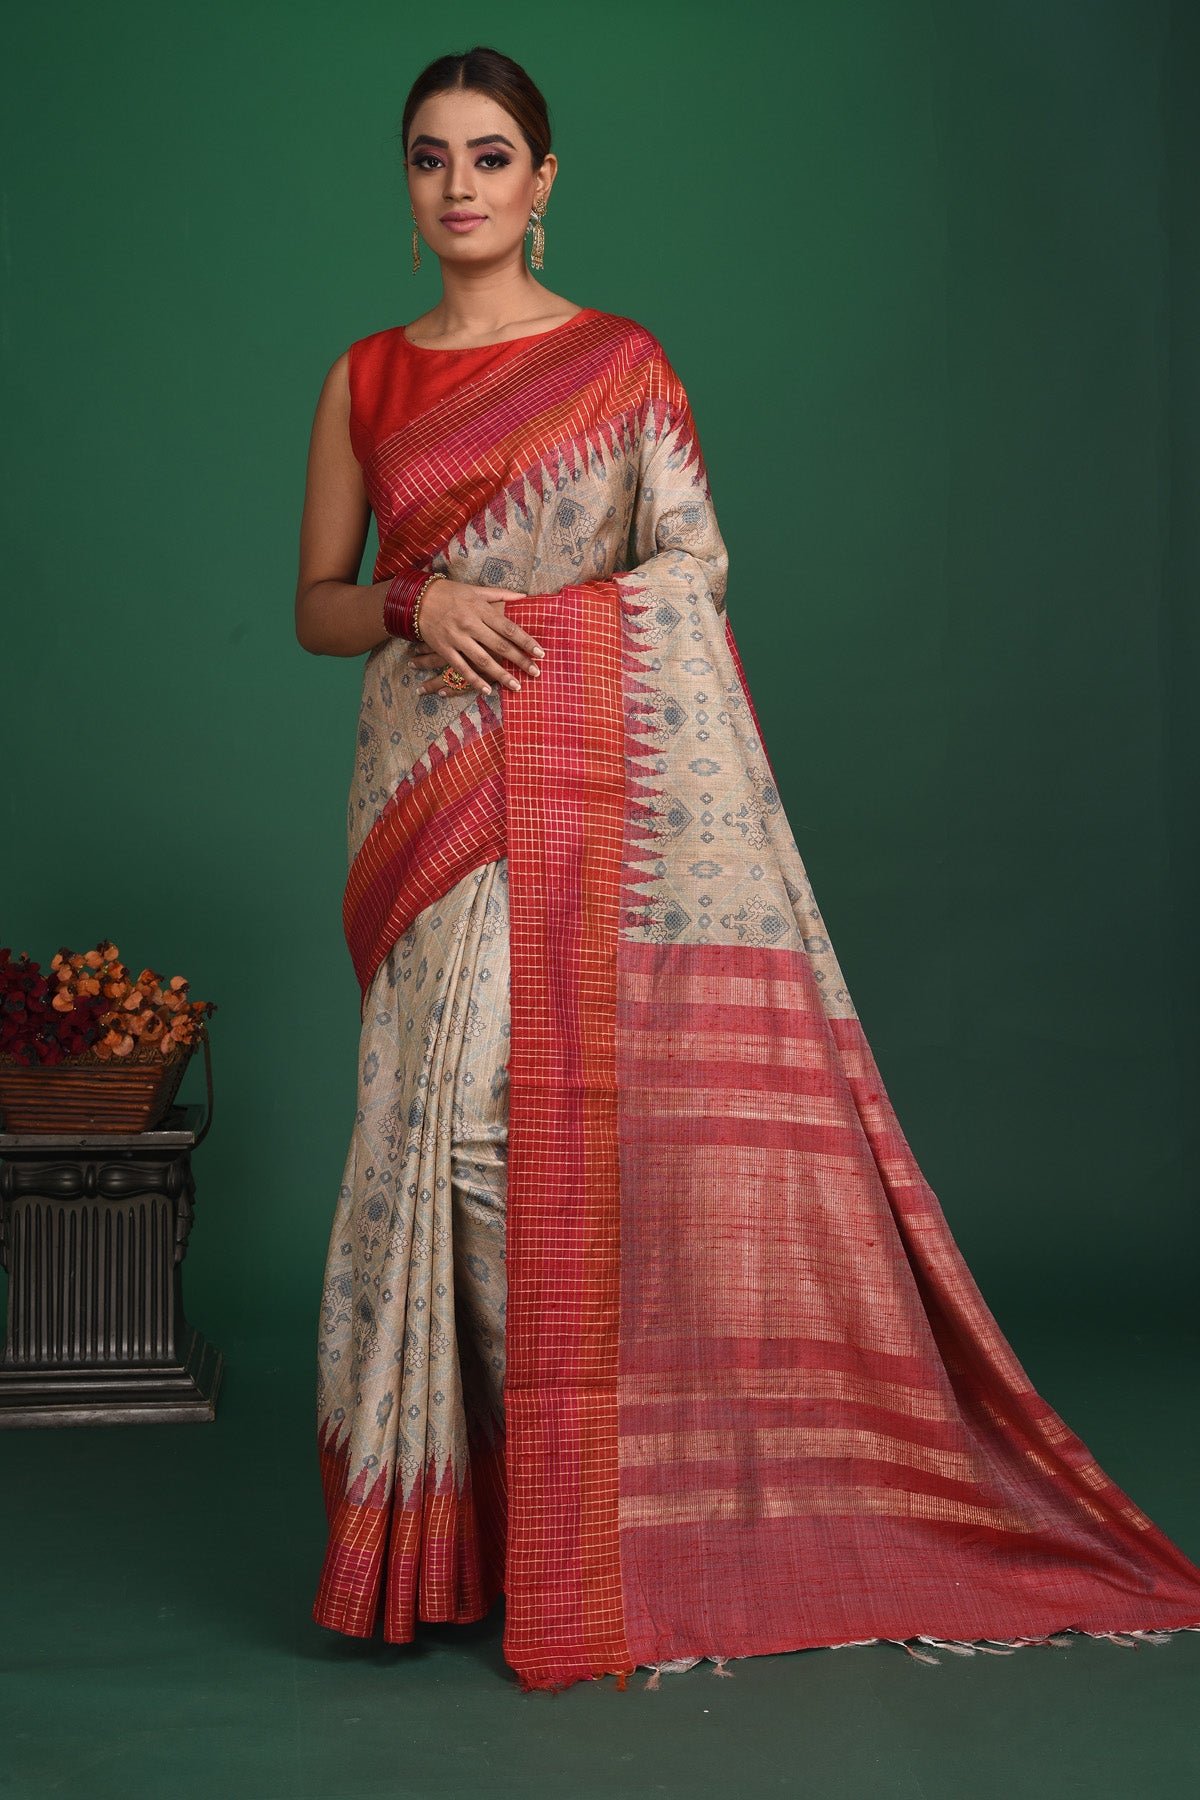 Shop this exquisite beige tussar saree with red vidharbha and zari border online in USA which is handcrafted from fine silk tussar fabric, this tie and dye saree brings out the nature of flow. This tussar saree with elegant red Vidharbha border is making everyone swoon over it. Make it yours and flaunt a handwoven marvel with minimal jewellery for a casual day outfit. Add this pure tussar saree to your collection from Pure Elegance Indian fashion store in USA.-Full view with open pallu.